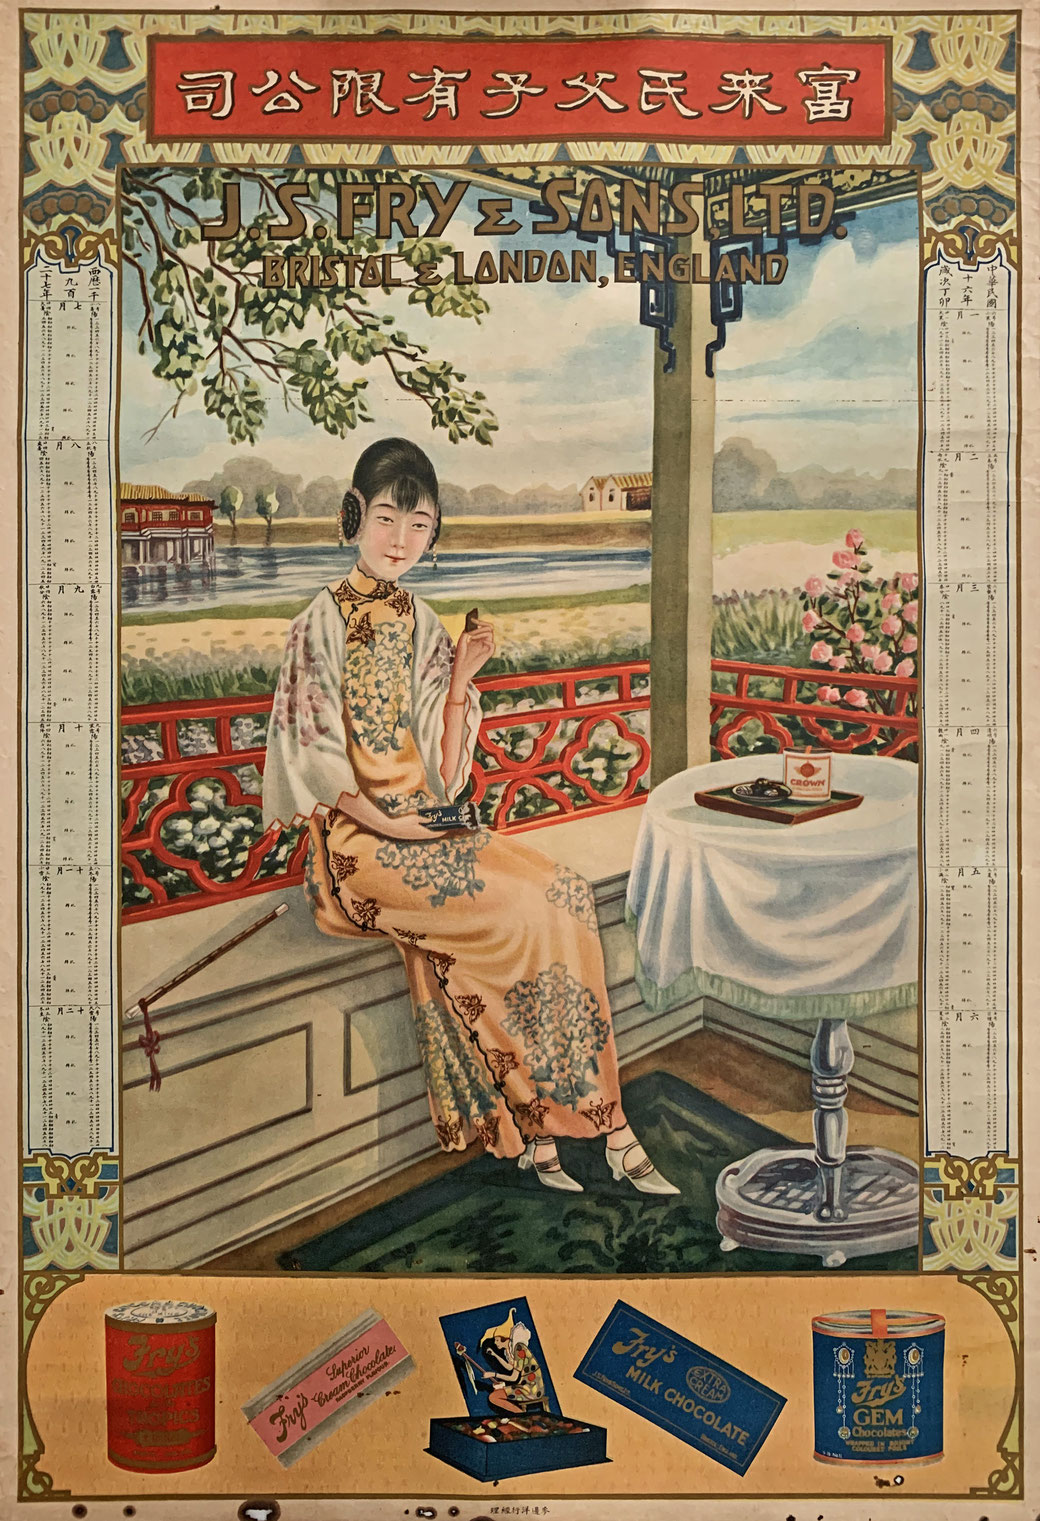 J.S. Fry & Son's 1927 Chinese Calendar Poster Advertising. From the MOFBA collection